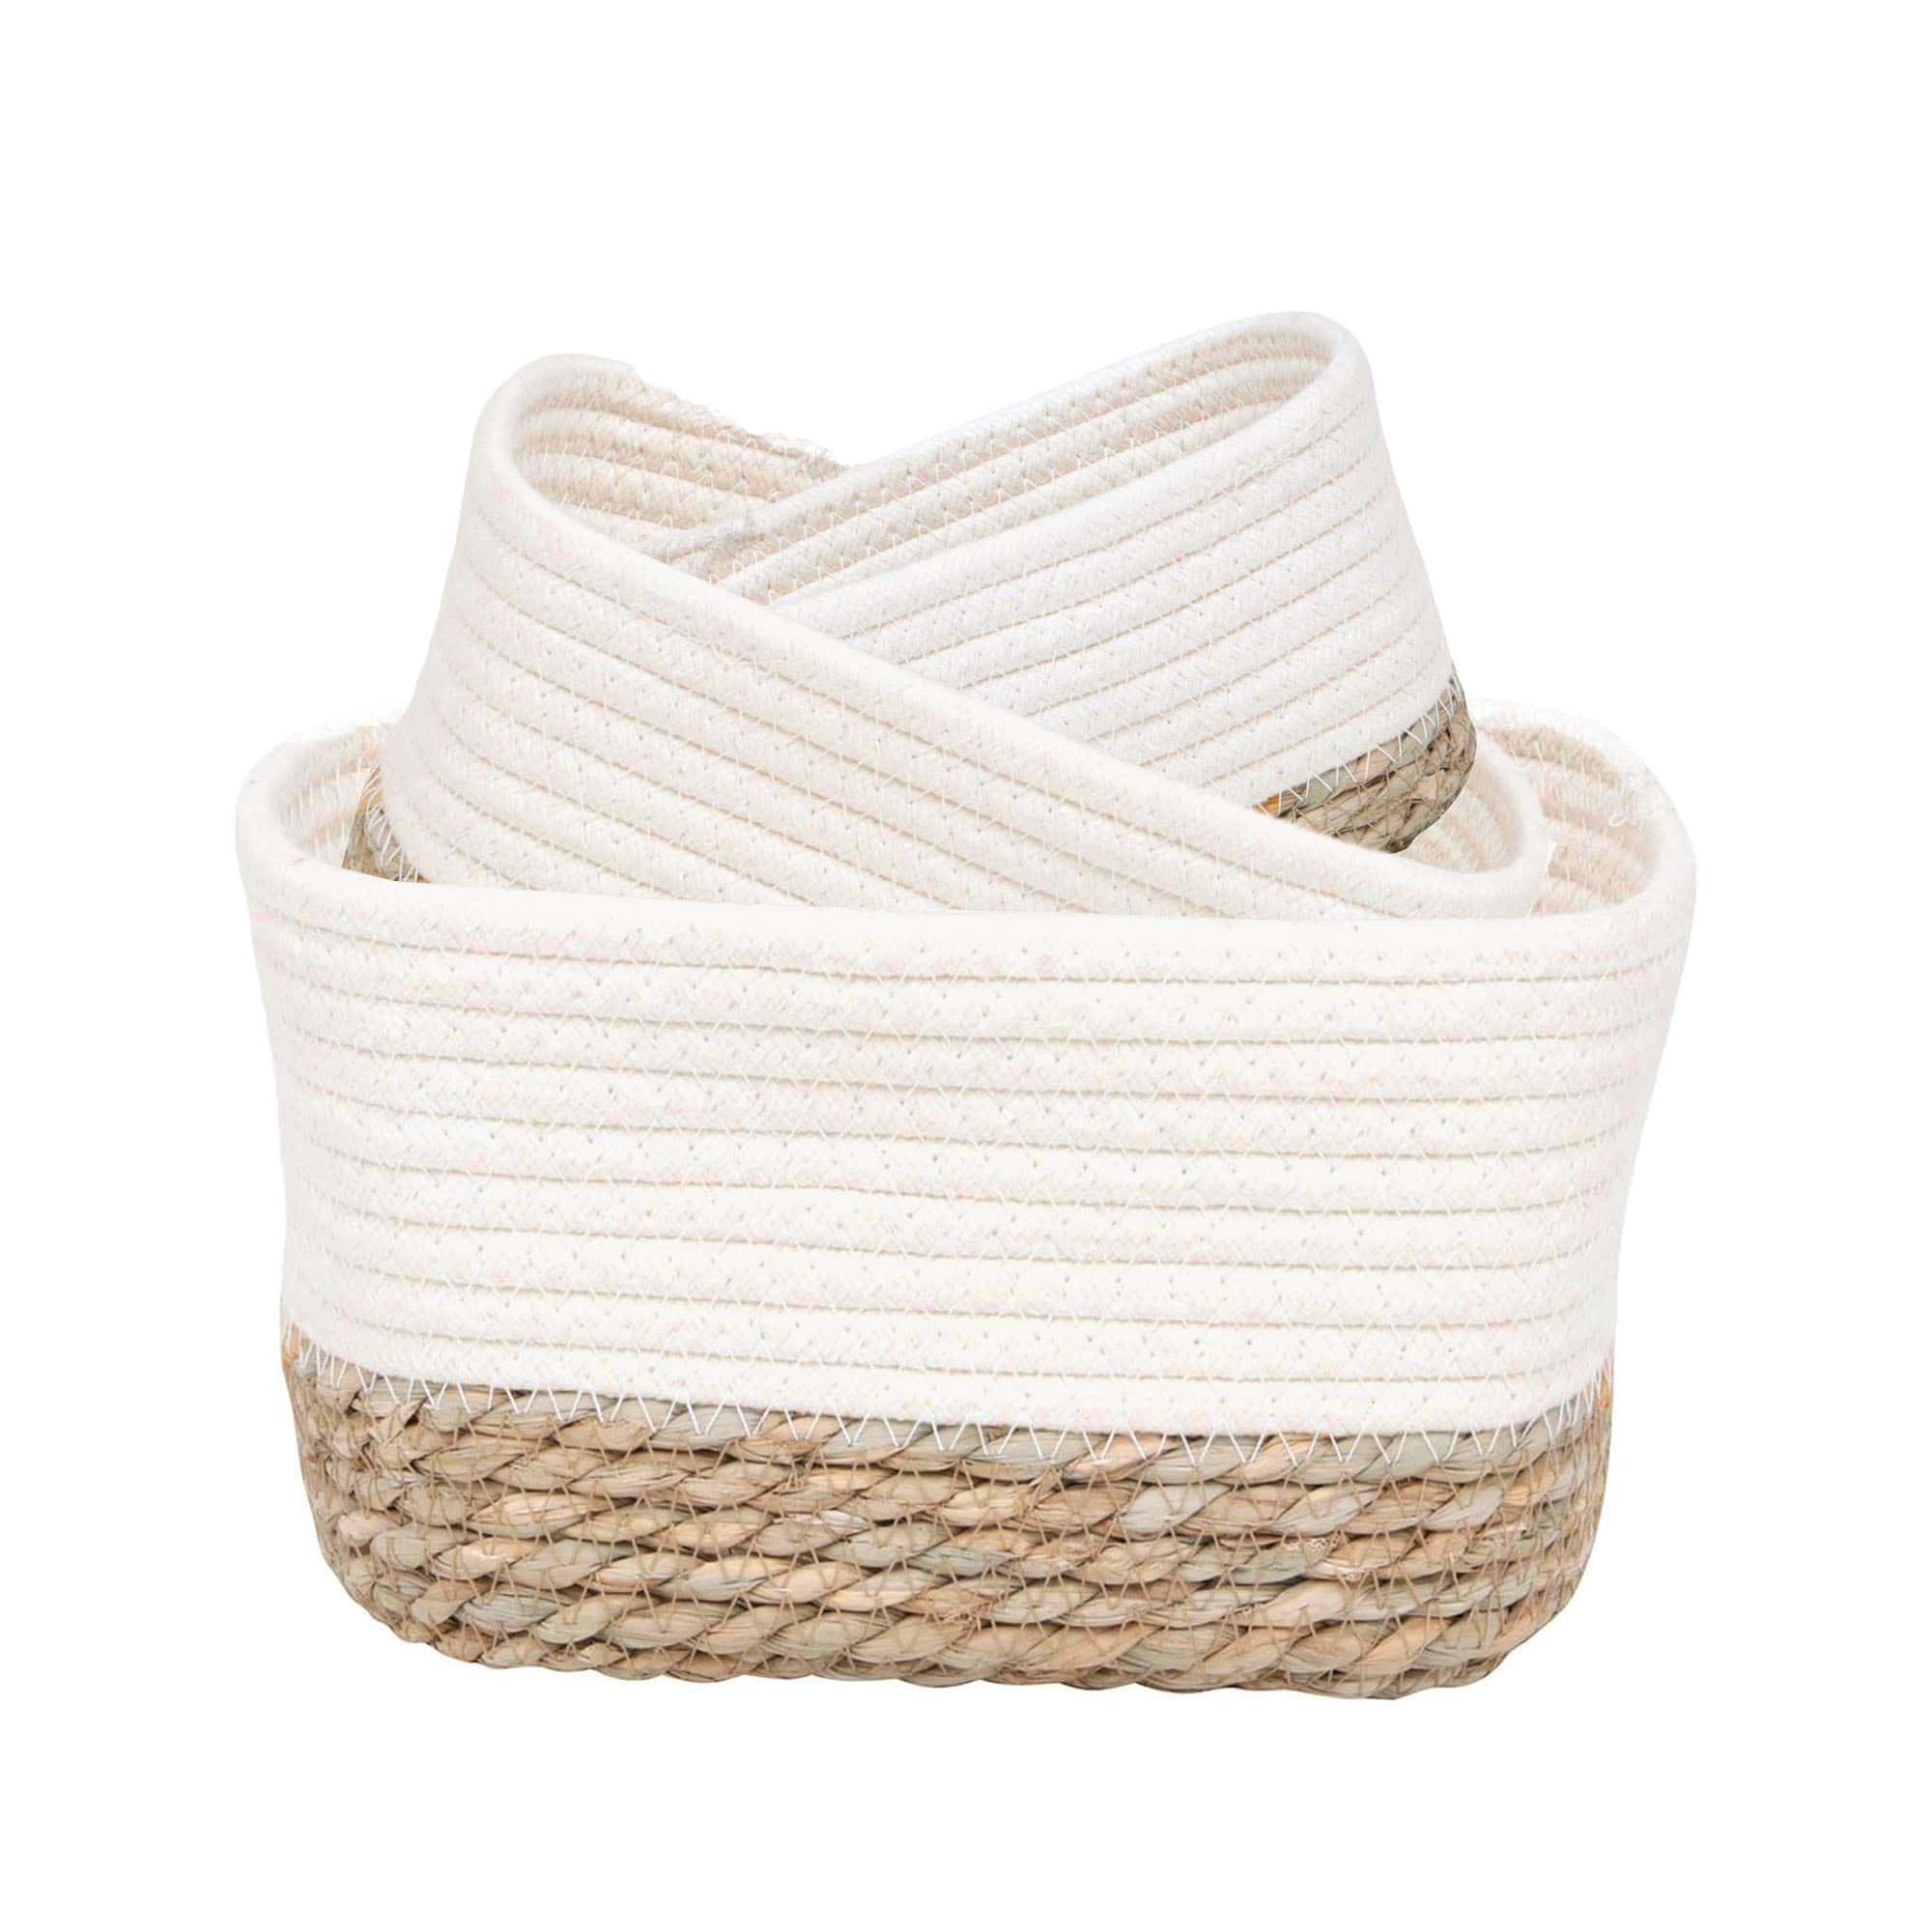 white cotton and natural seagrass set of 3 storage baskets